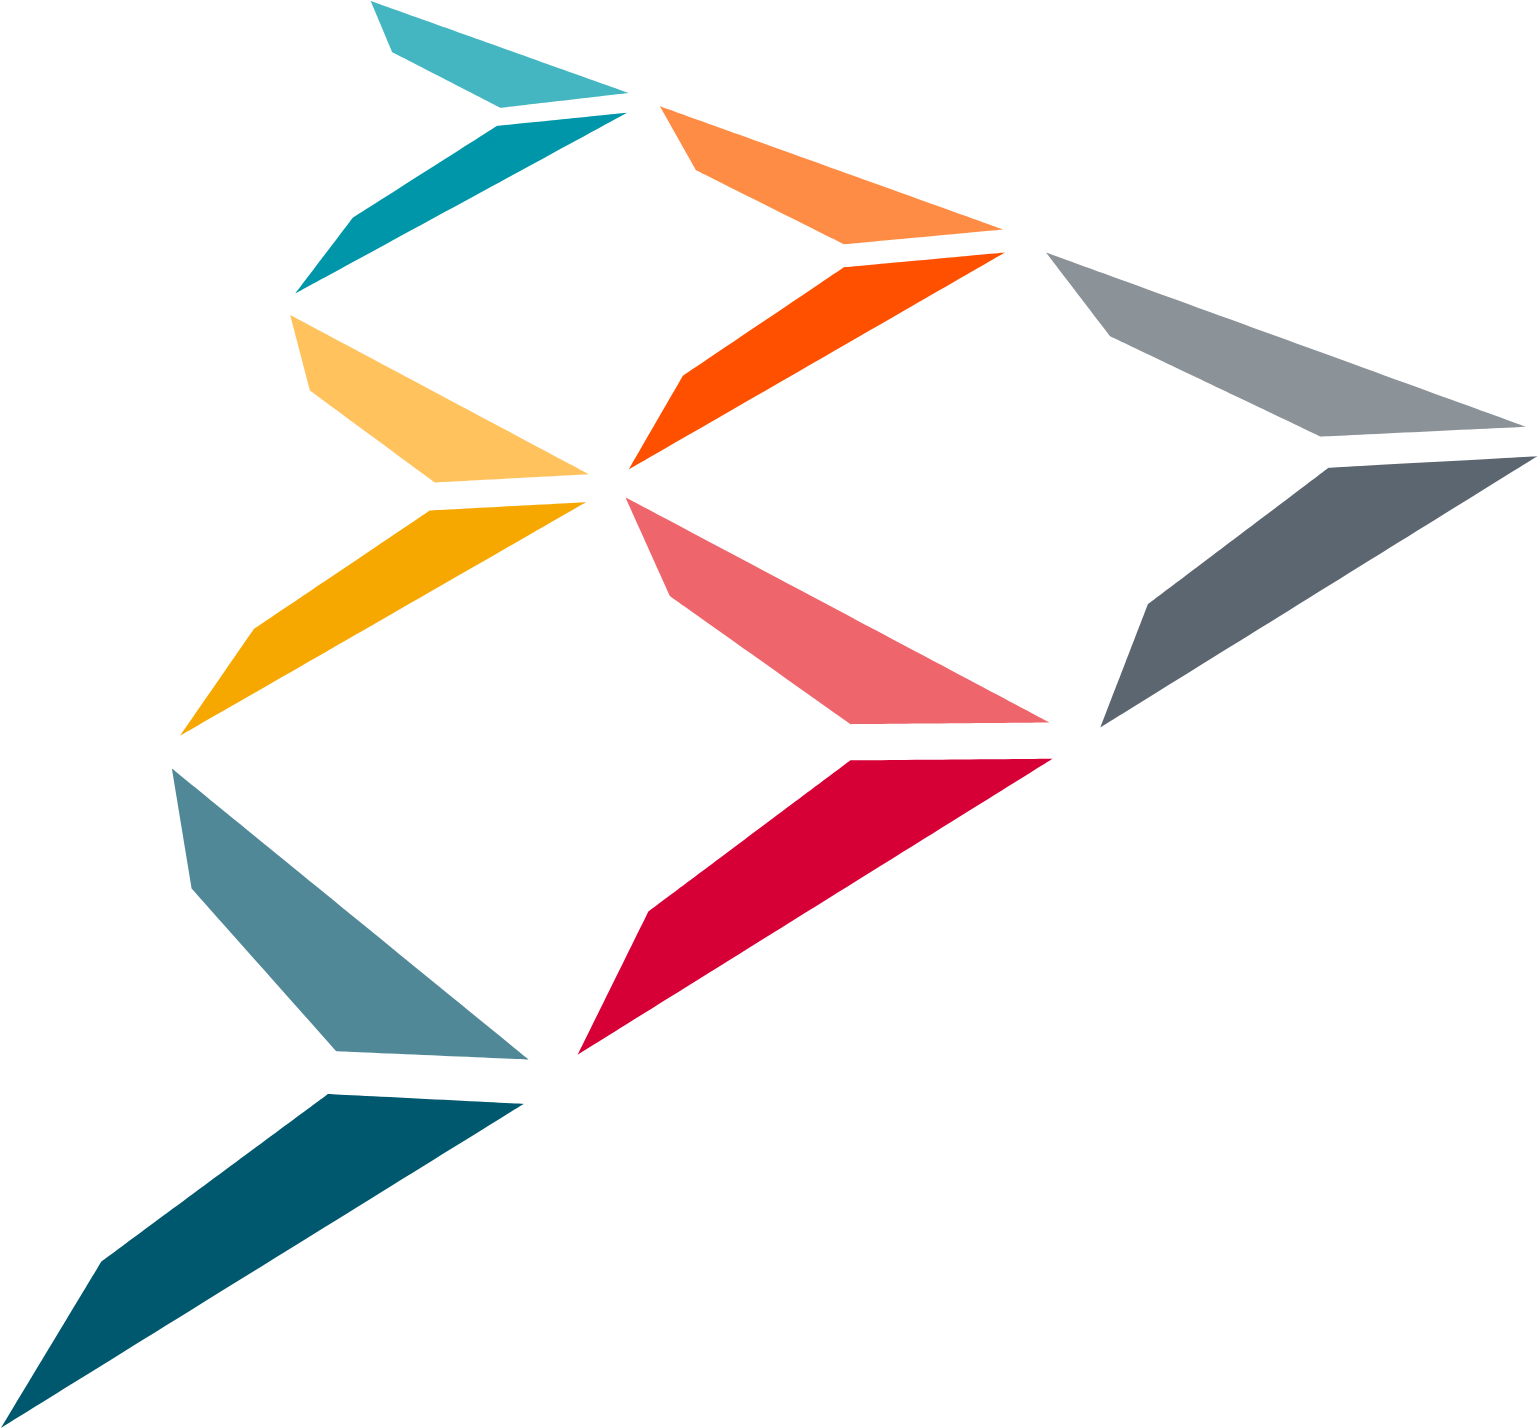 Syndax Pharmaceuticals logo (transparent PNG)